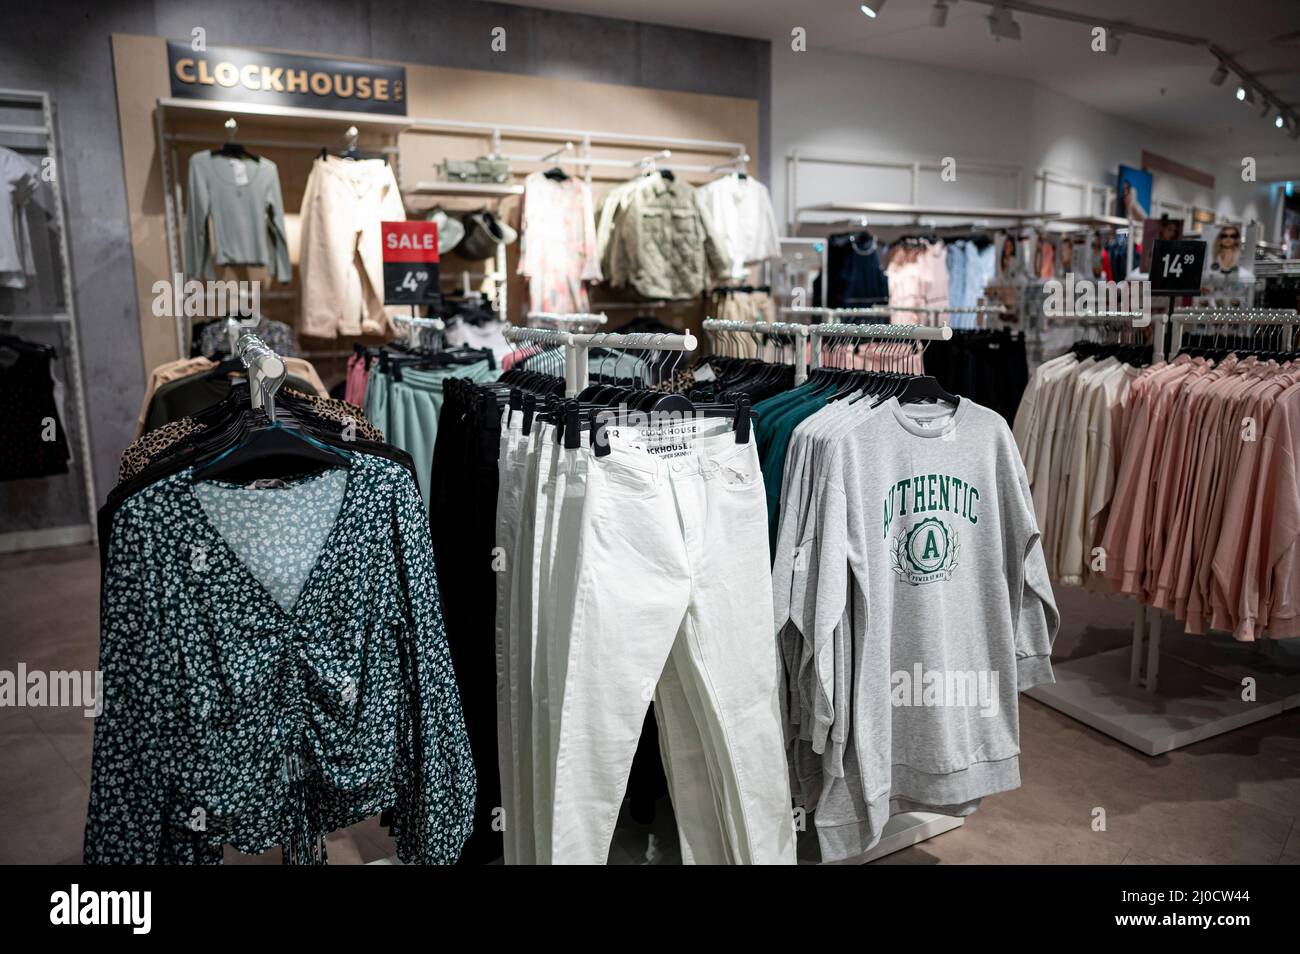 ILLUSTRATION - 02 March 2022, Berlin: Clothes hang youth department  Clockhouse in the clothing store C&A in a shopping center in  Berlin-Marzahn. Photo: Fabian Sommer/dpa Stock Photo - Alamy